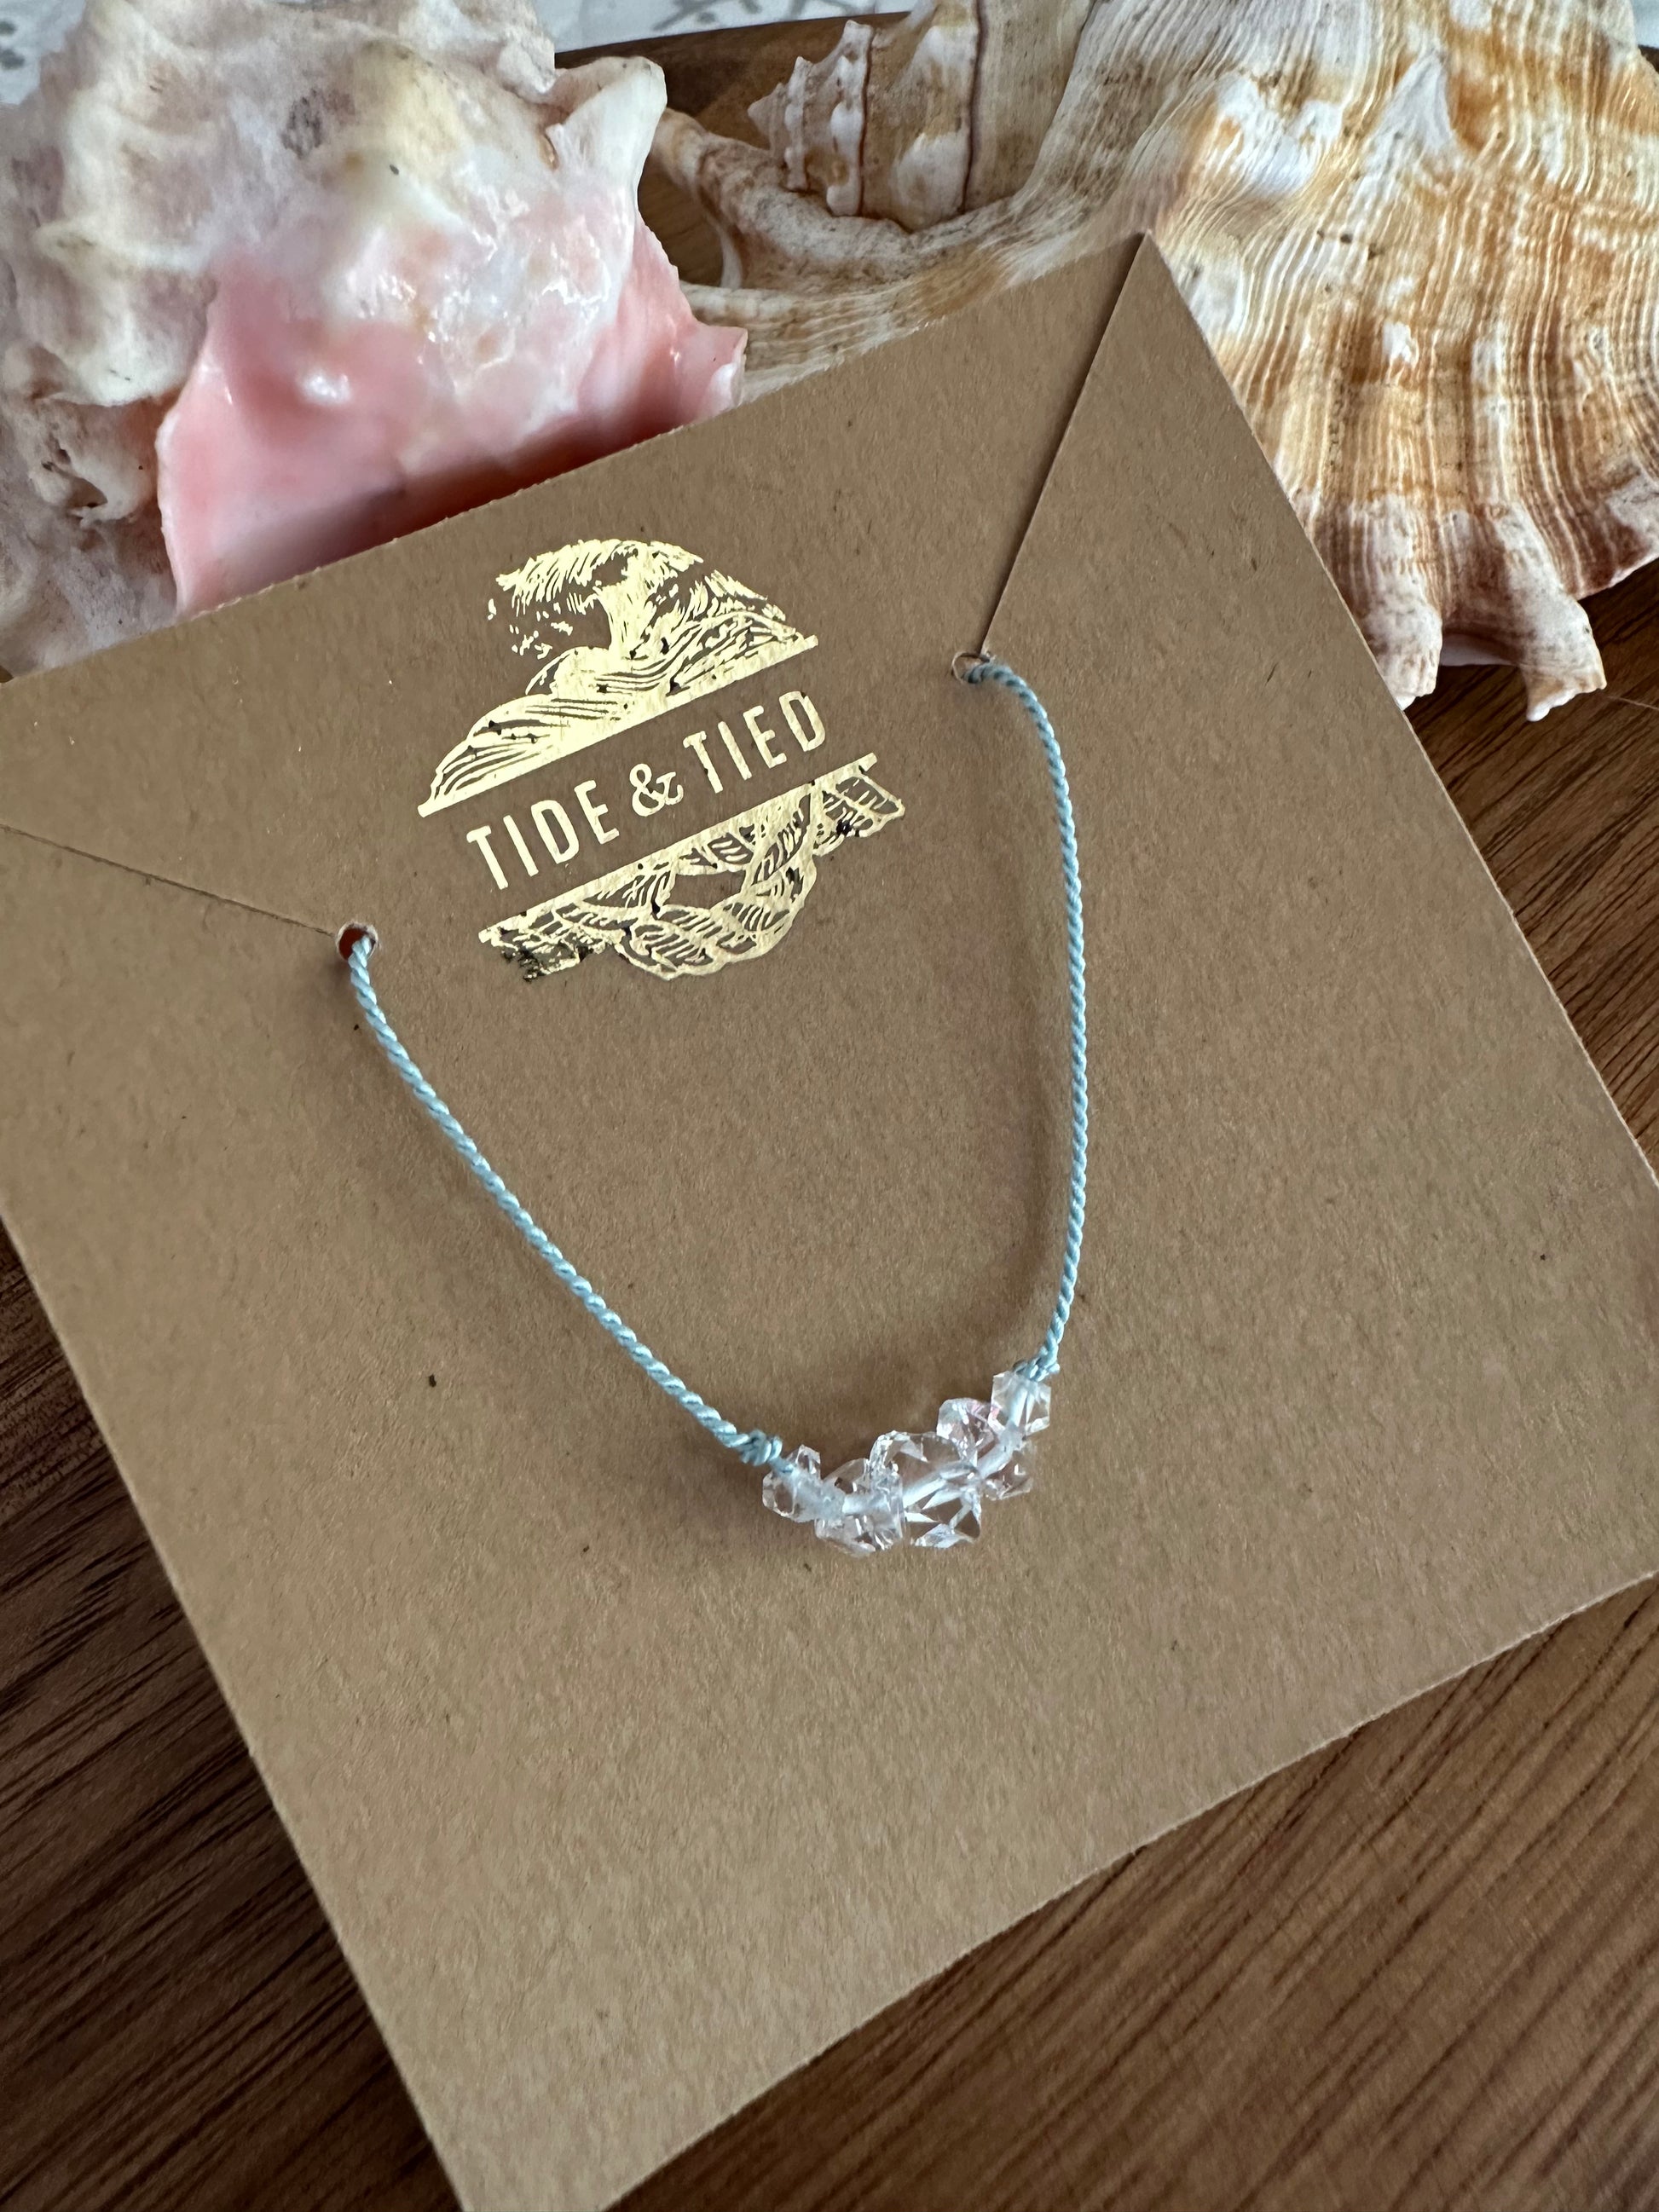 A row of herkimer Diamond stones on a blue silk necklace on a brown craft earring card iwth a gold logo at the top on a wooden background with two shells in the upper edge